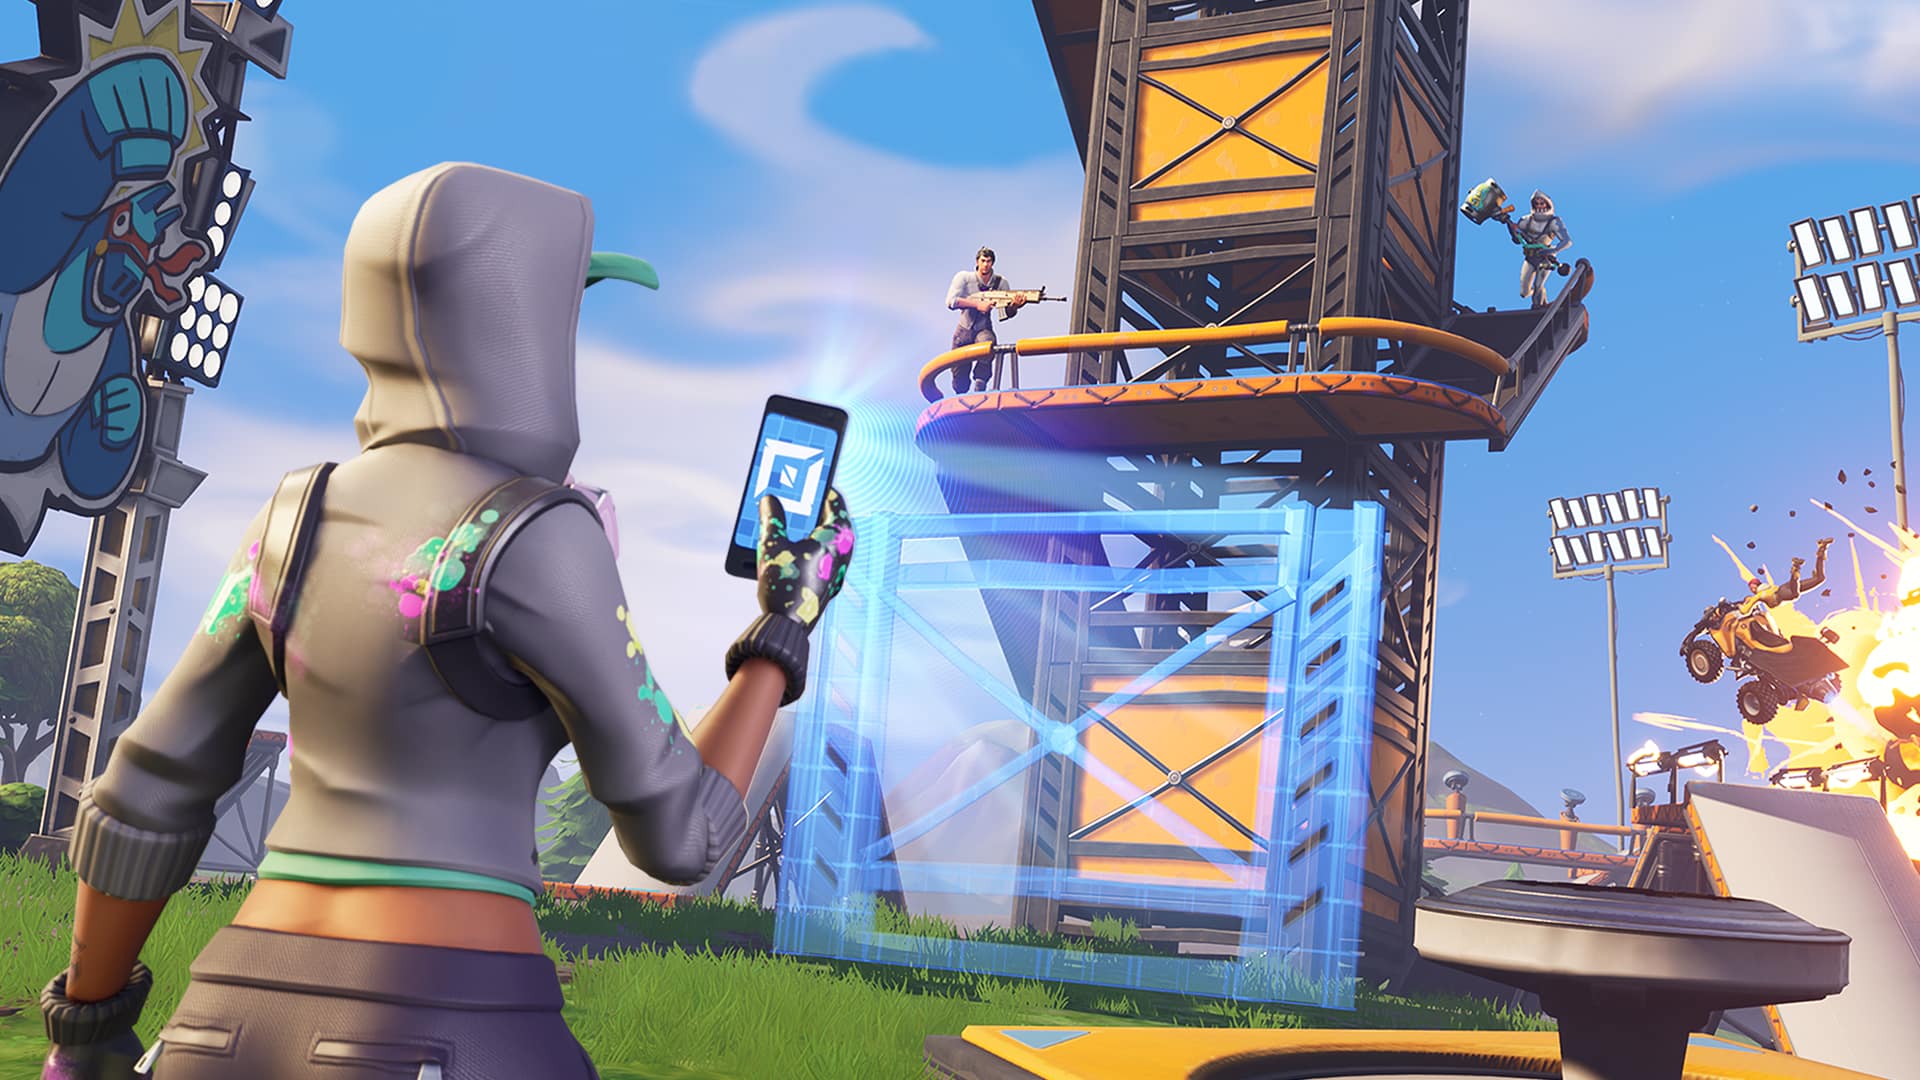 The Creative Mode is a great way to earn XP in Fortnite